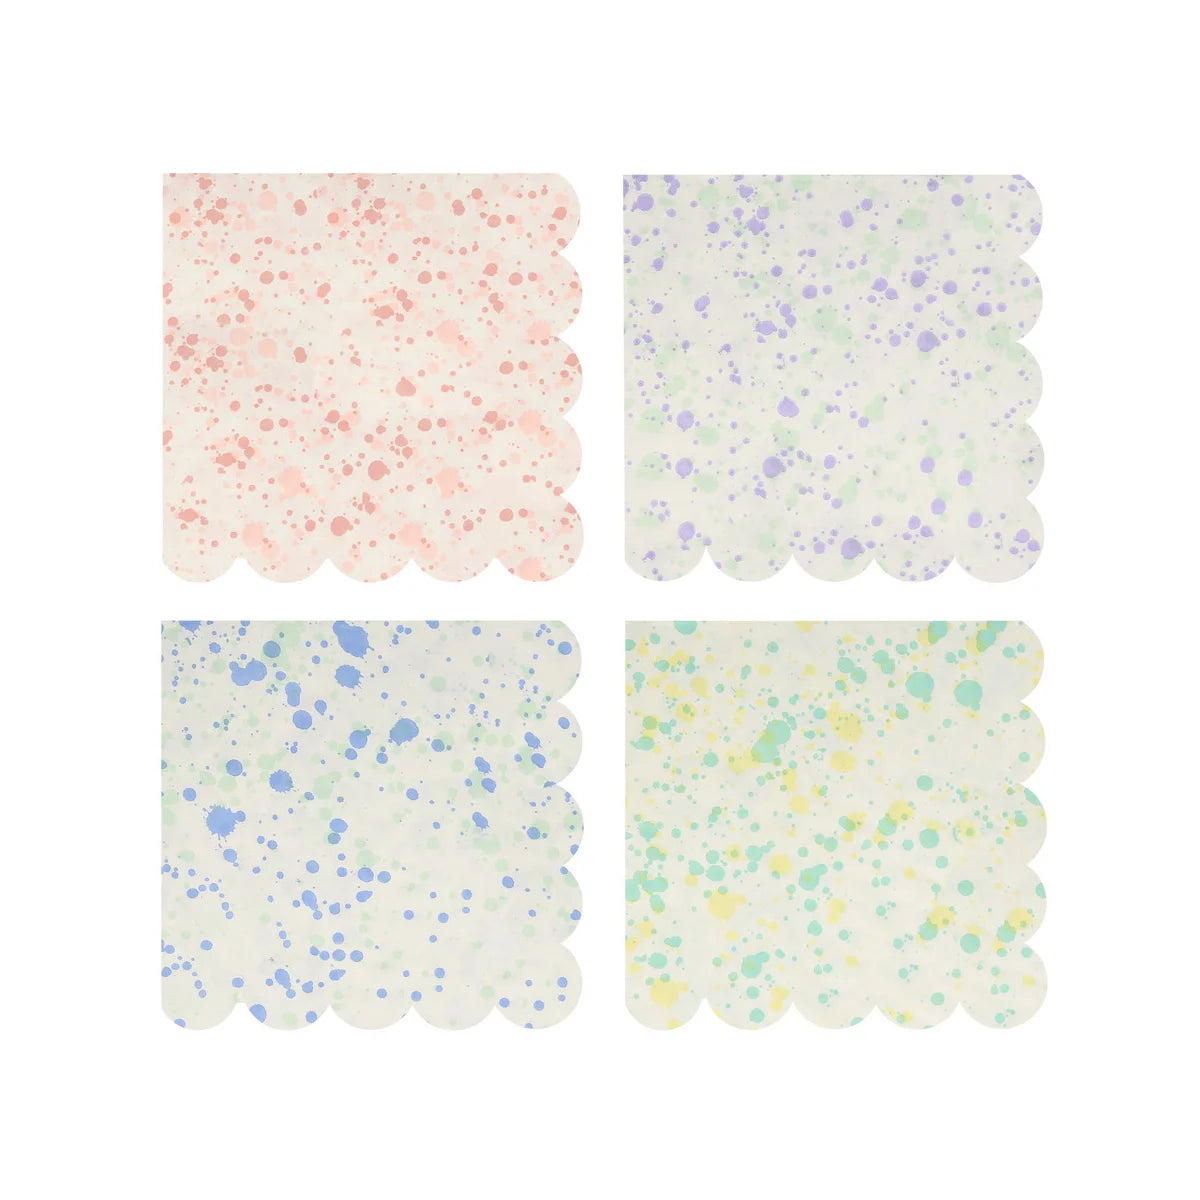 Speckled napkins in pink, purple, green and blue sold at ALittleConfetti. By Meri Meri